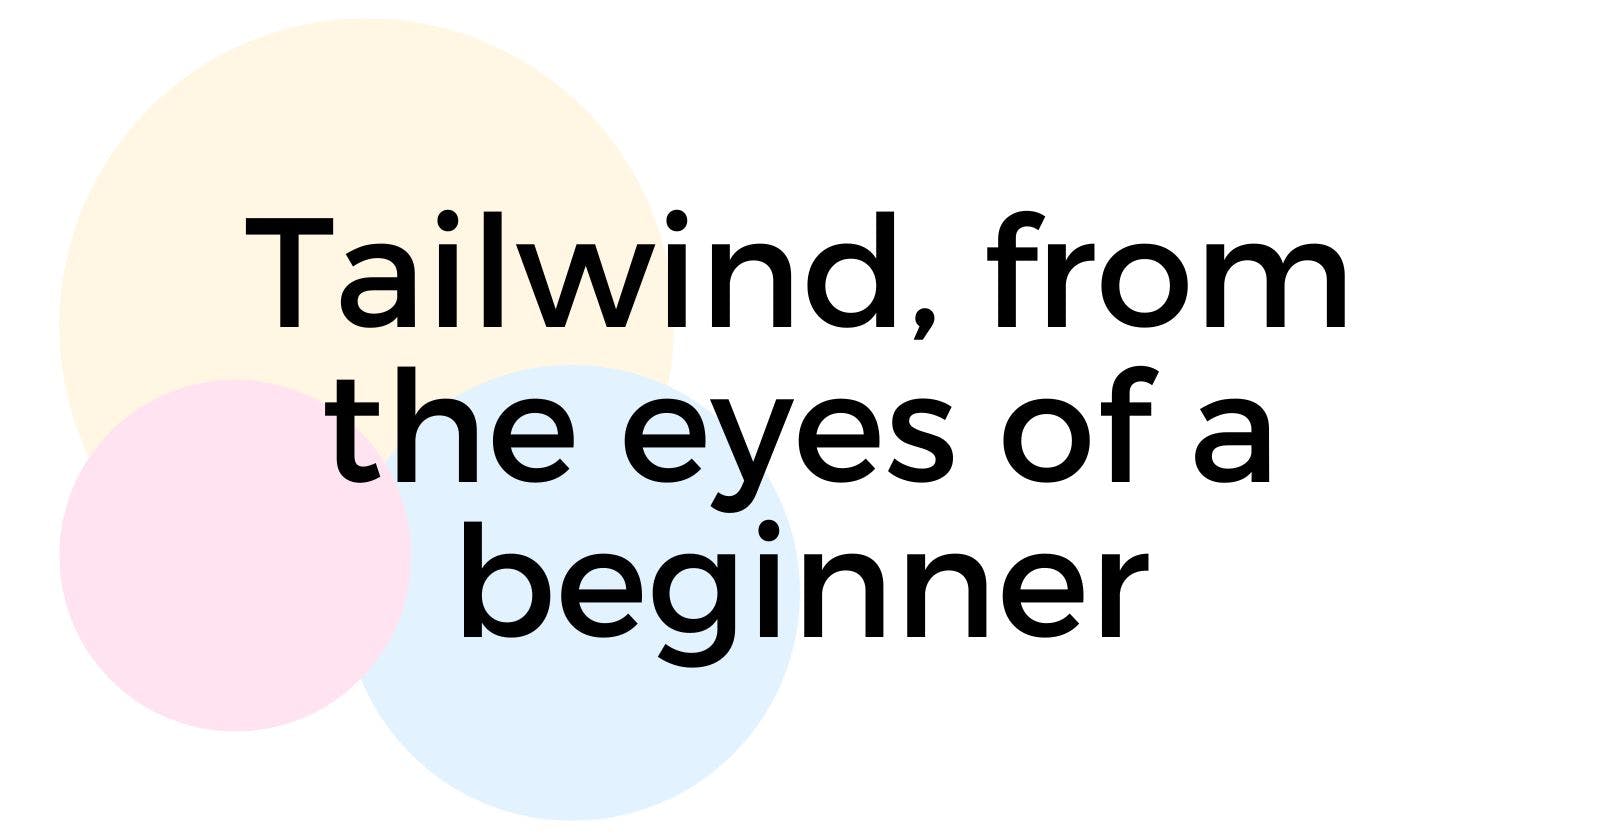 Tailwind, from the eyes of a beginner